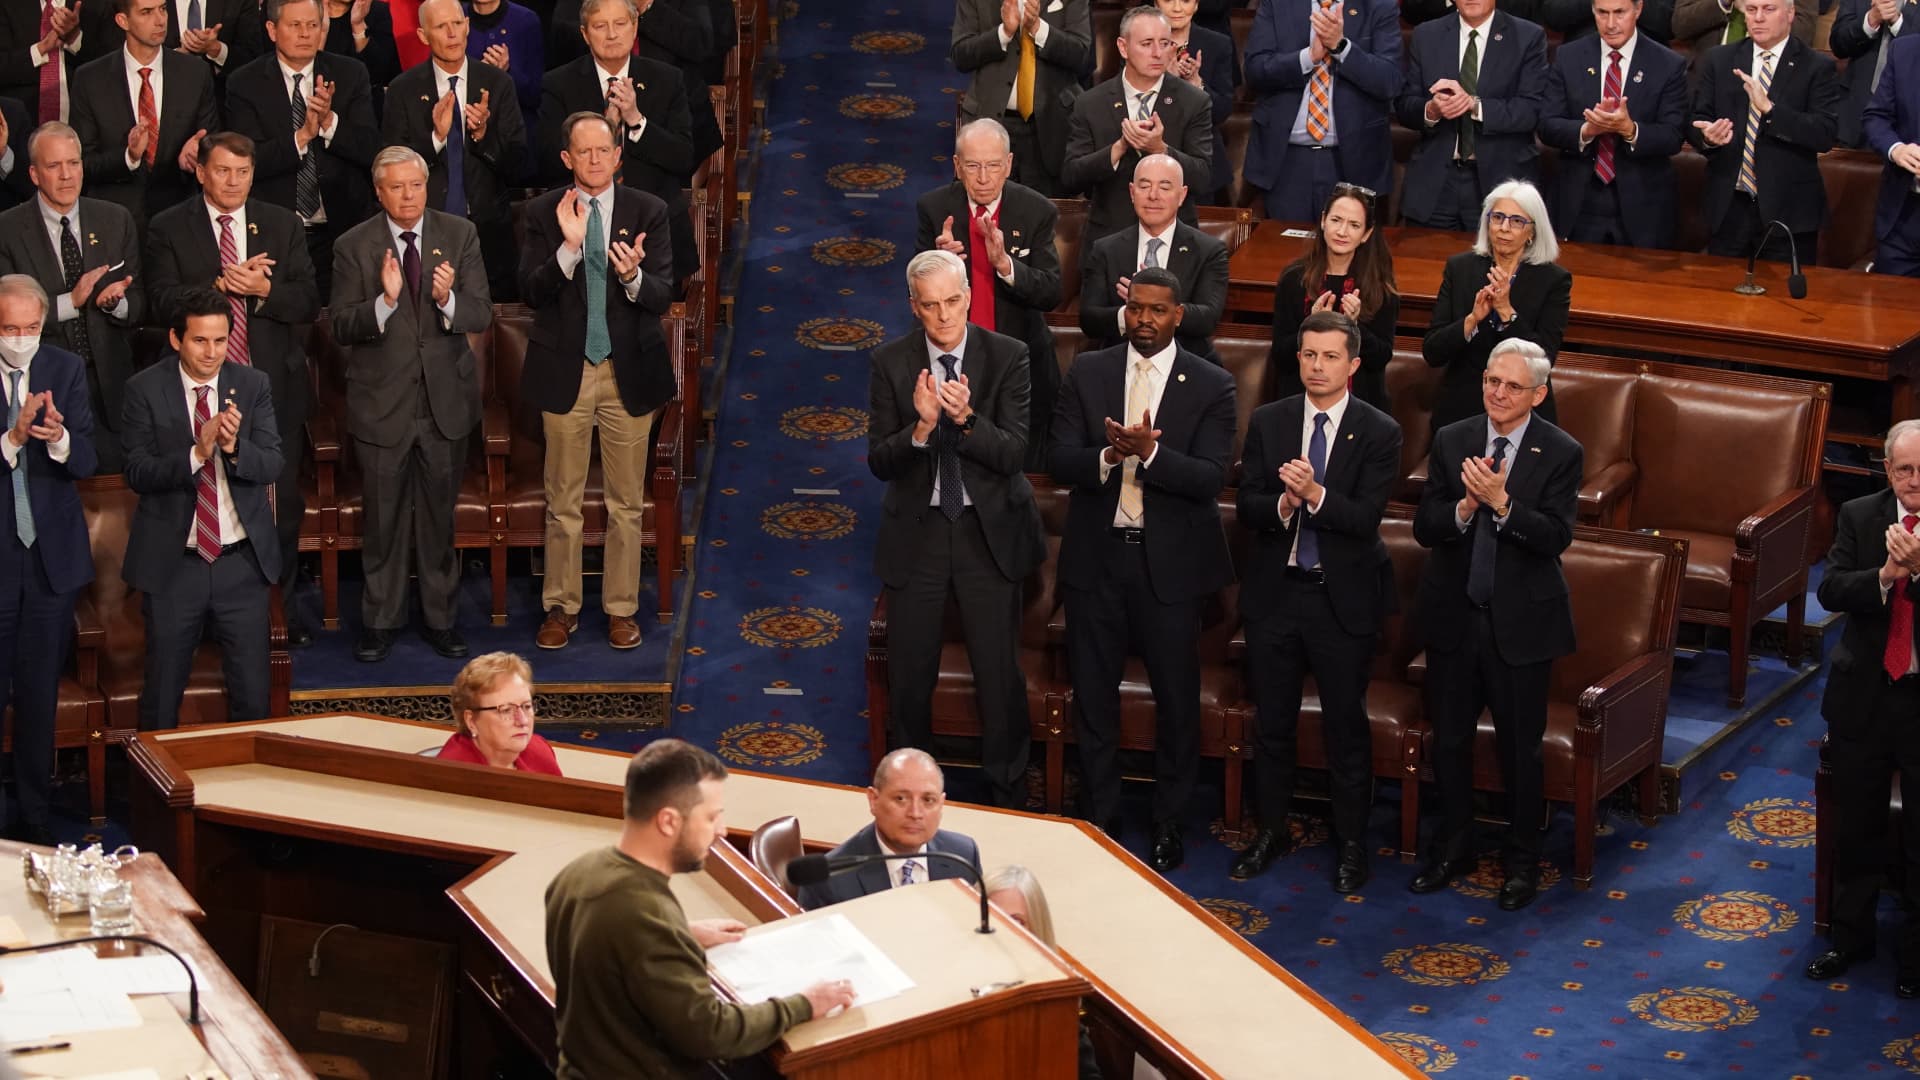 Cabinet members and members of Congress applause as Zelenskyy speaks during a joint meeting of Congress.